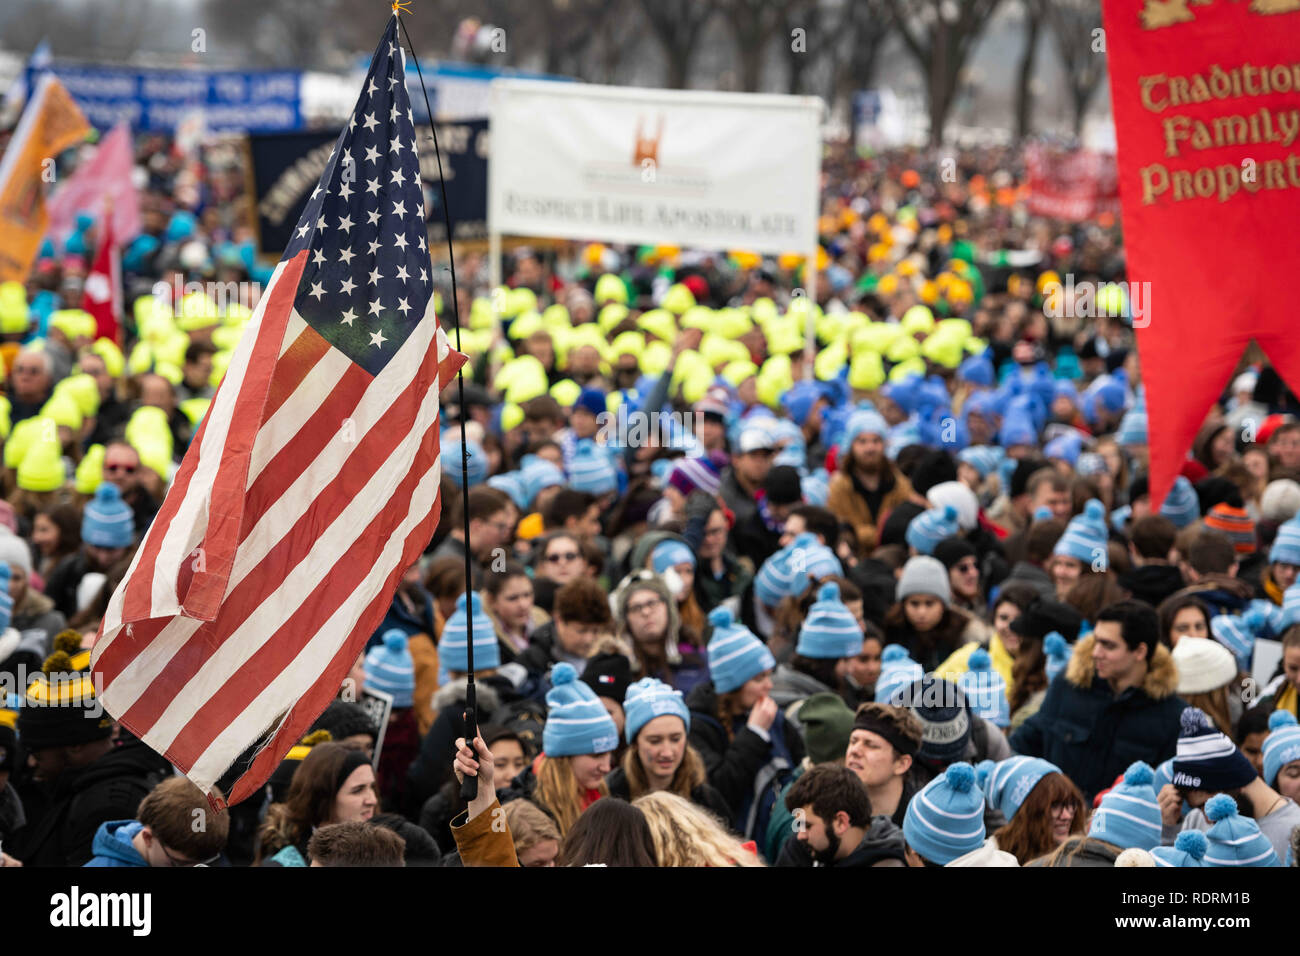 Washington Dc, Washinton DC, USA. 18th Jan, 2019. Thousands of Prolife advocates decended on the National Mall in Washington DC on Friday January 18th to March and have their voices heard. Credit: Tyler Tomasello/ZUMA Wire/Alamy Live News Stock Photo